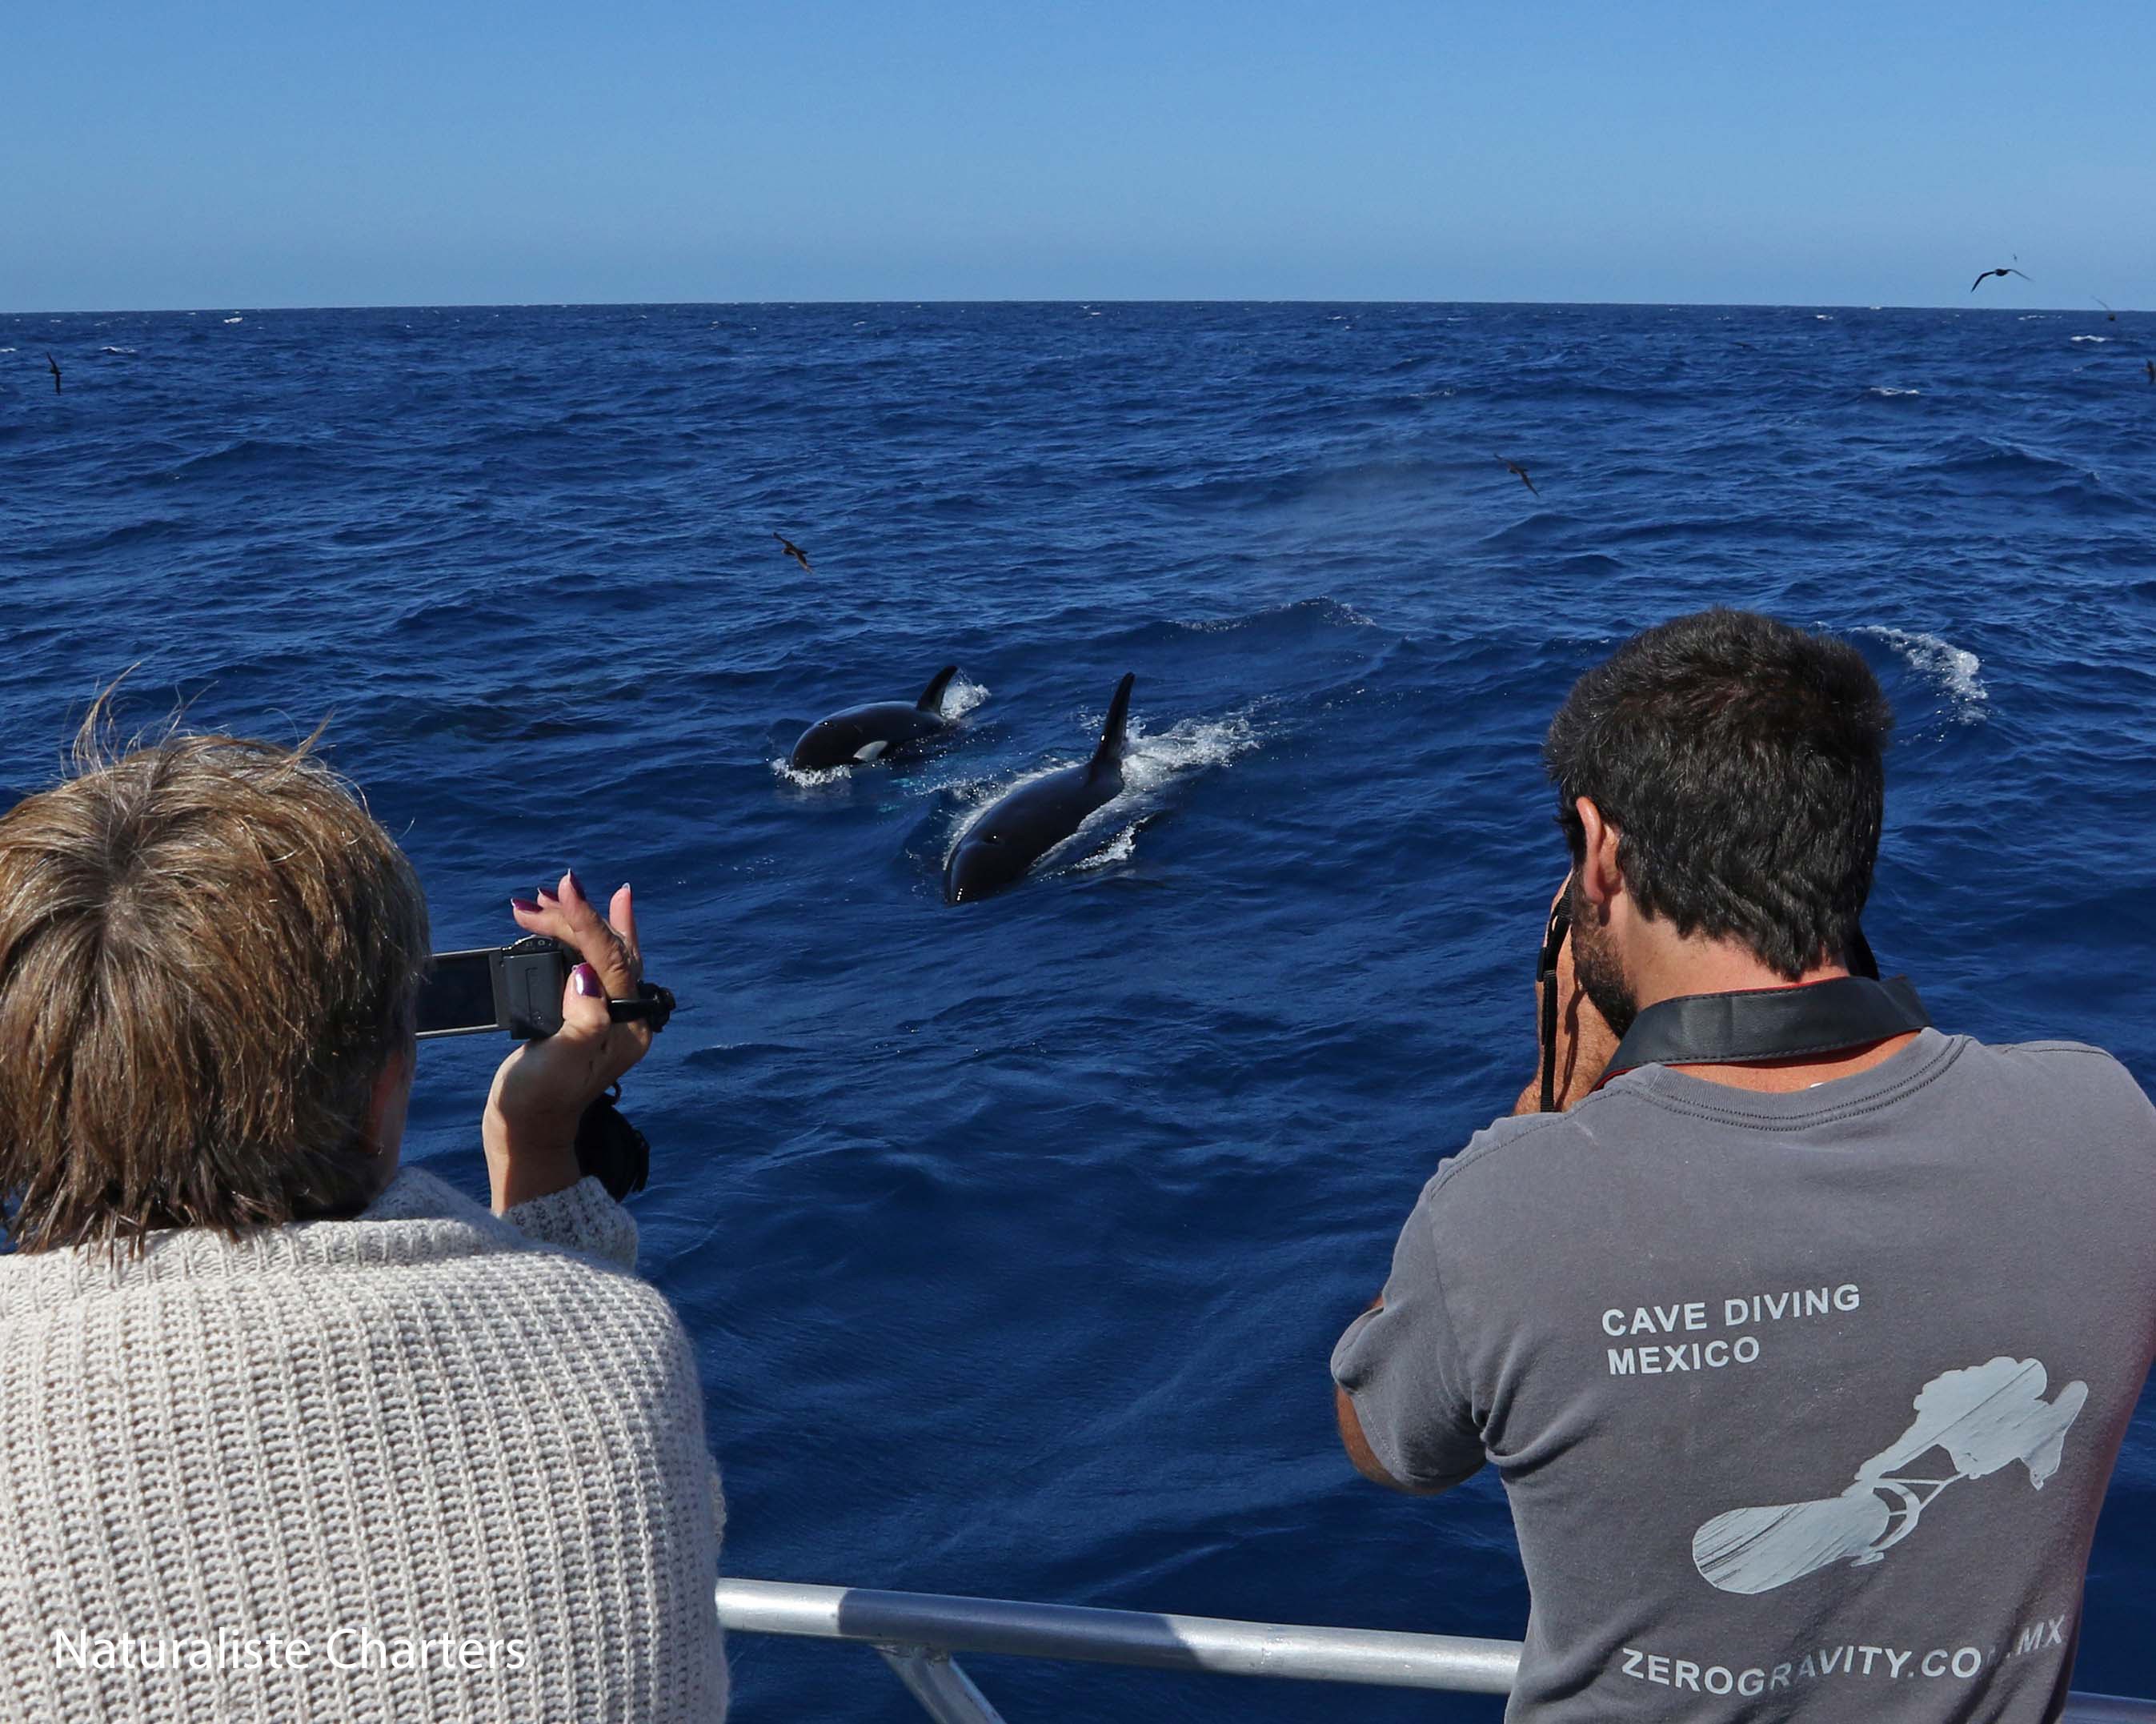 passengers on boat photographing killer whales in water